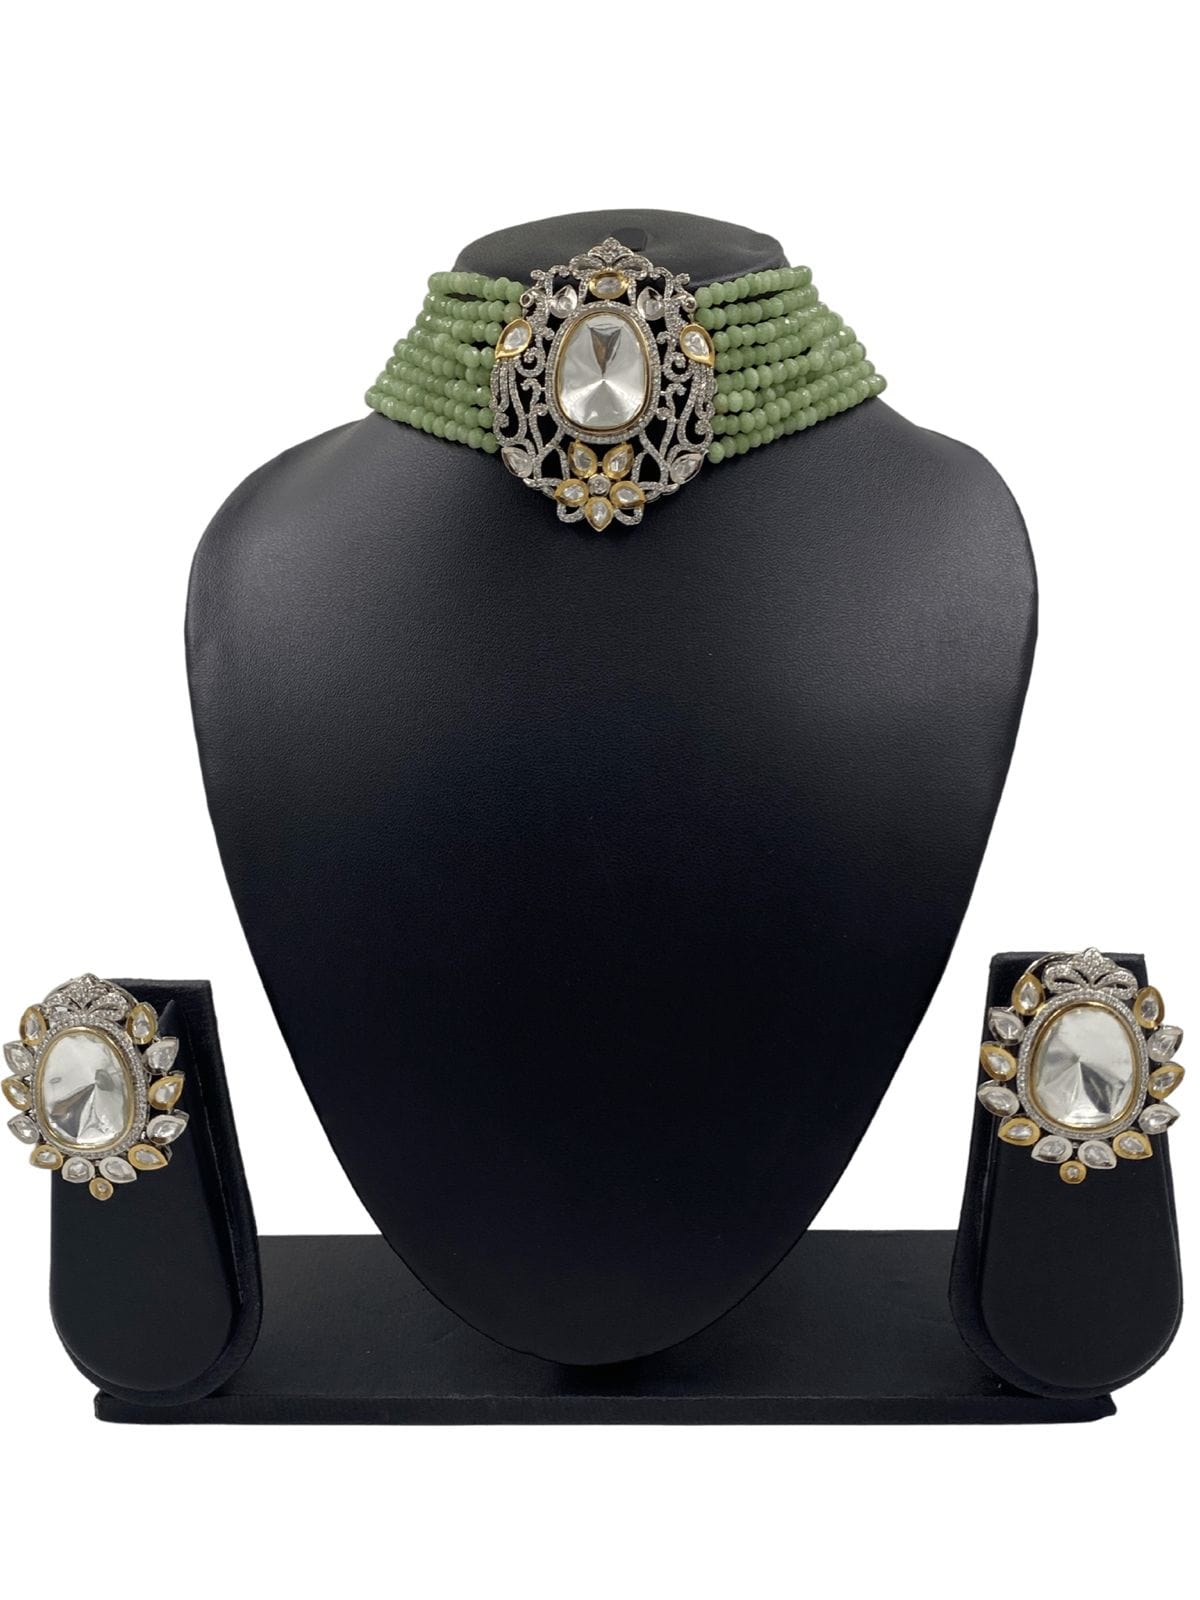 Silver Plated AD Kundan With Mint Green Beads Choker Necklace Set By Gehna Shop Choker Necklace Set